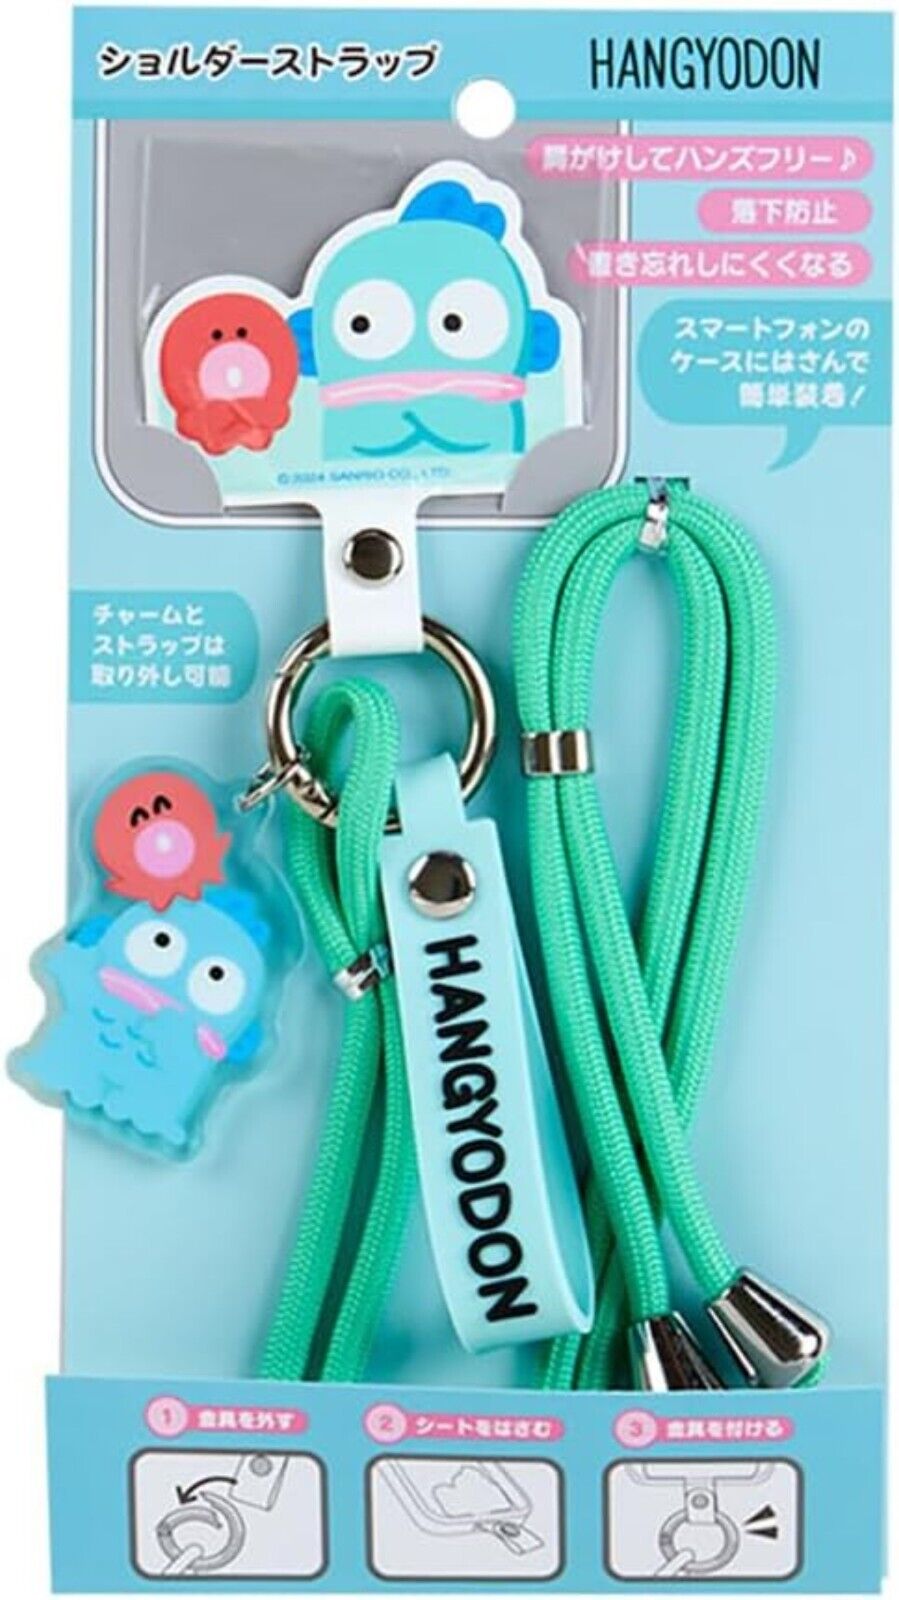 Sanrio Character Hangyodon Shoulder Strap (Usual Two Design Series) New Japan